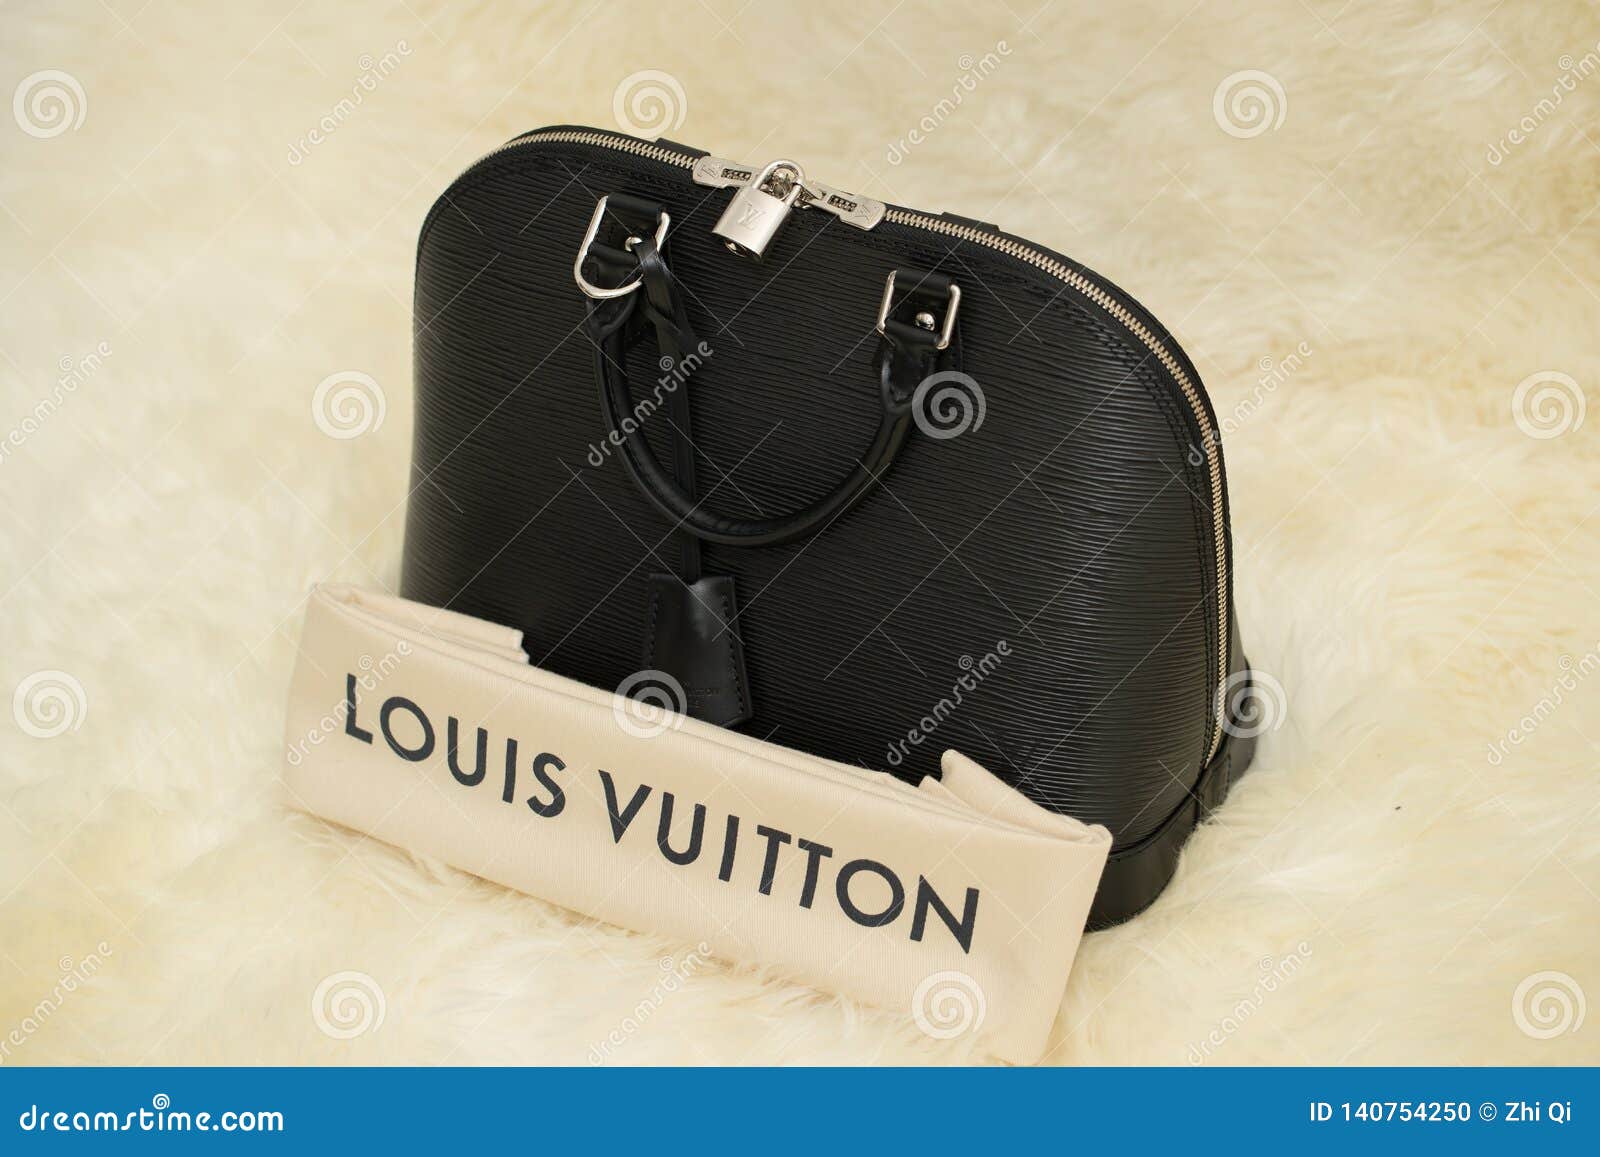 Which handbags are better: Louis Vuitton or Gucci? - Quora